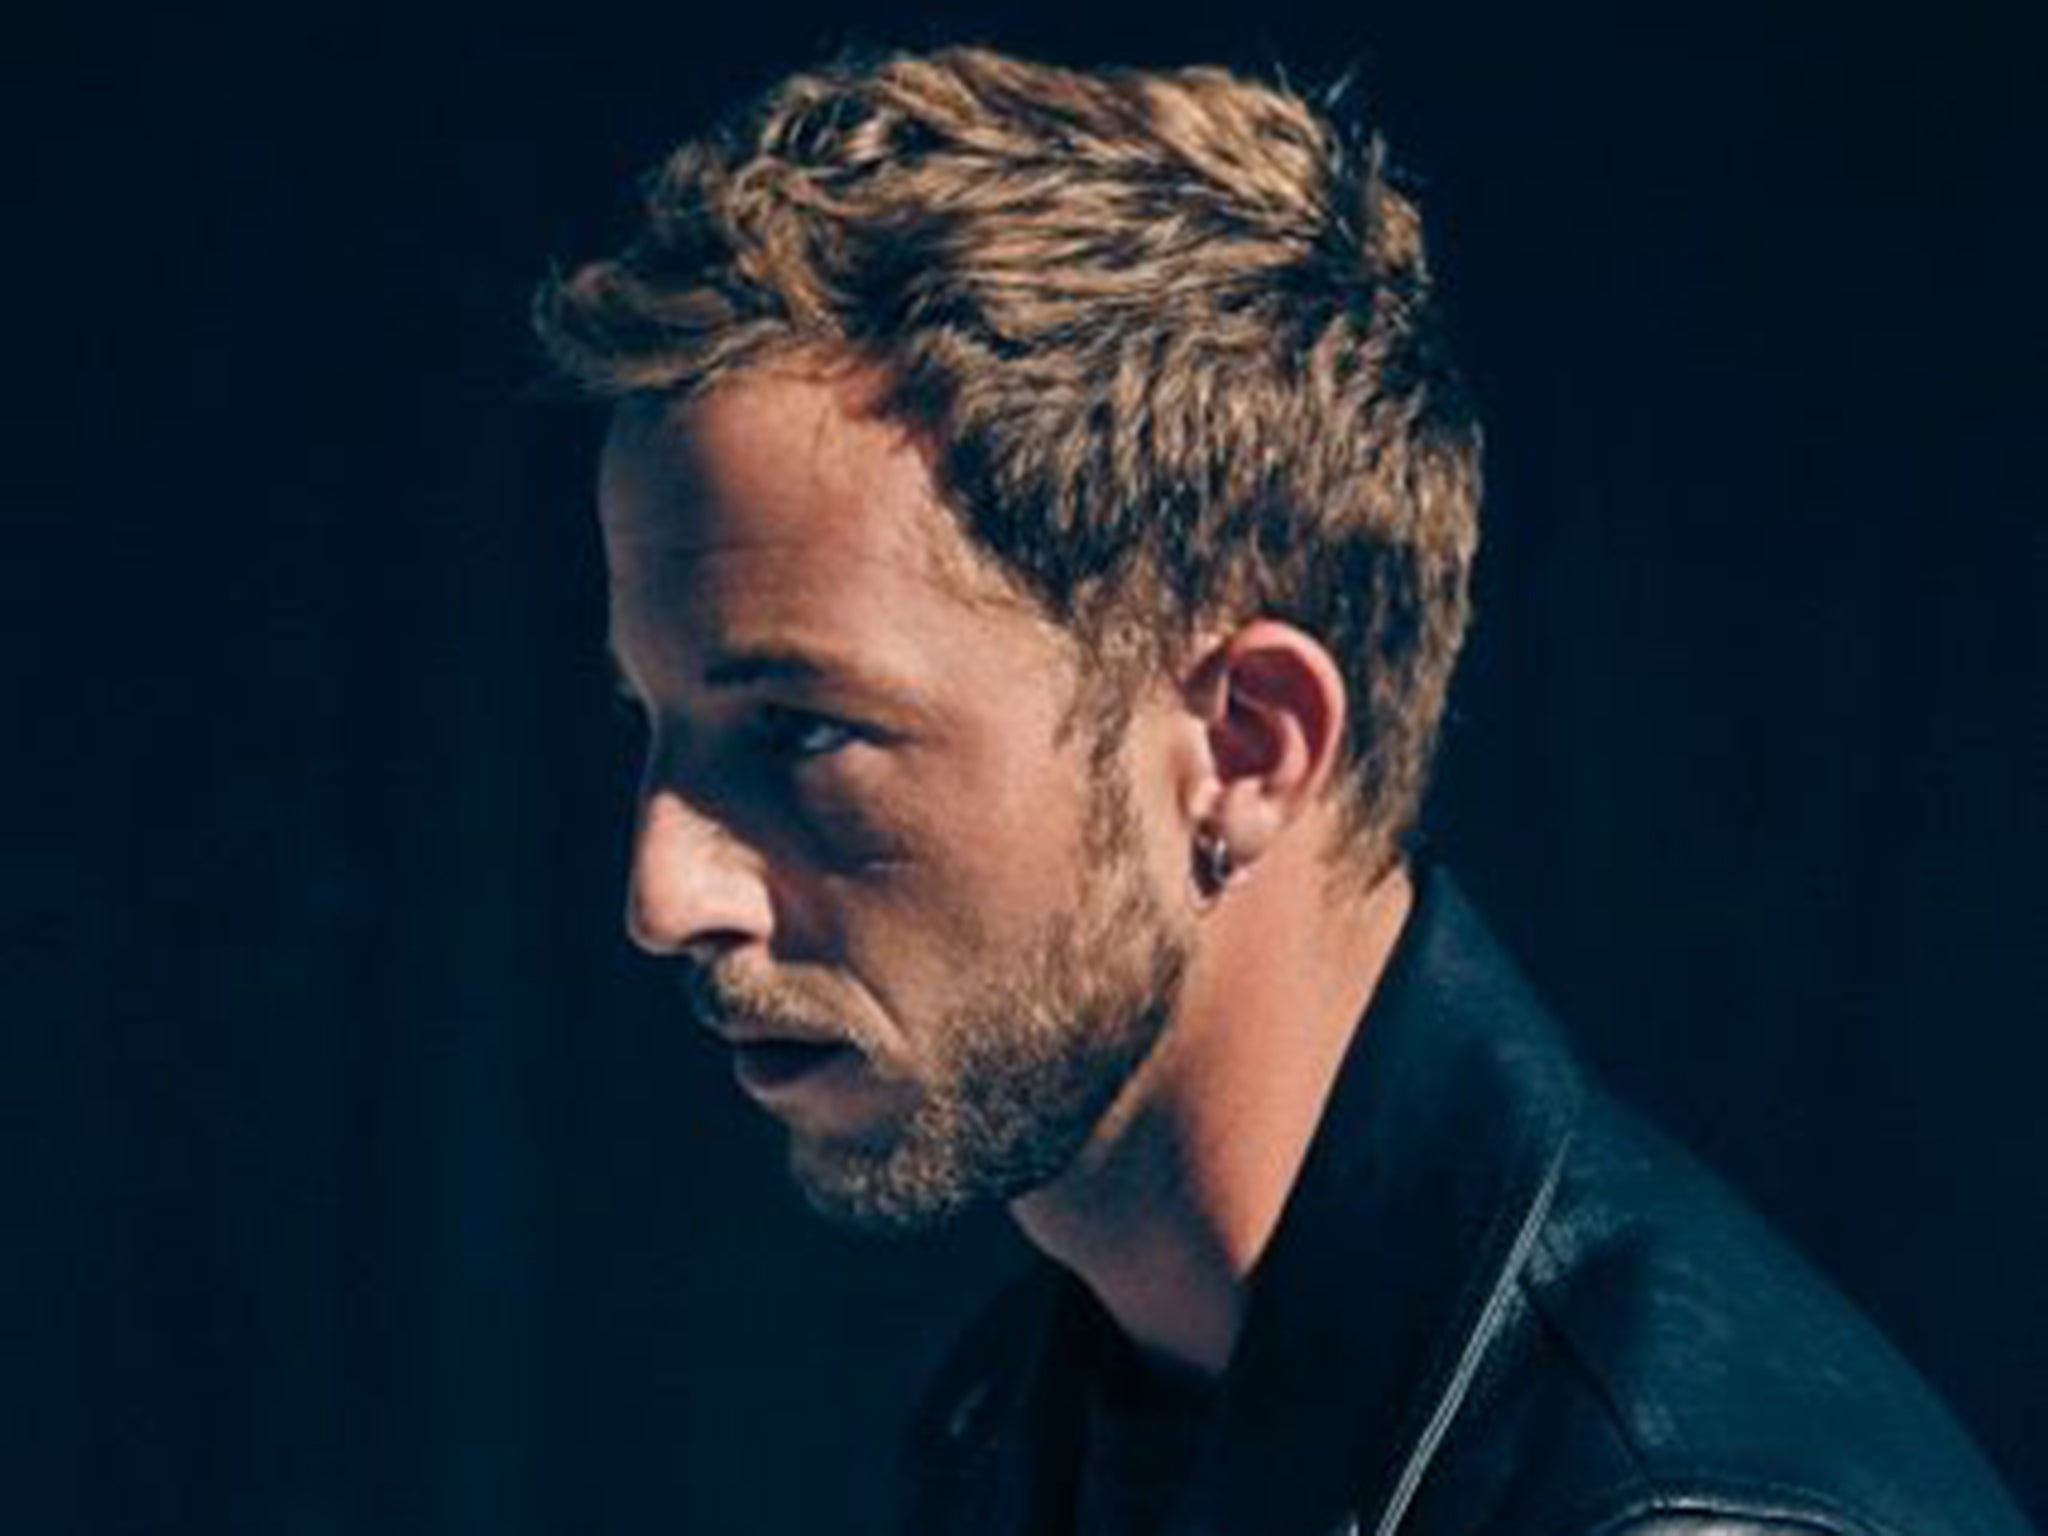 James Morrison was 21 when he released his debut album, Undiscovered. He had an appealingly raspy voice – the result of whooping cough as a baby – which helped lift his songs from the humdrum towards the memorable